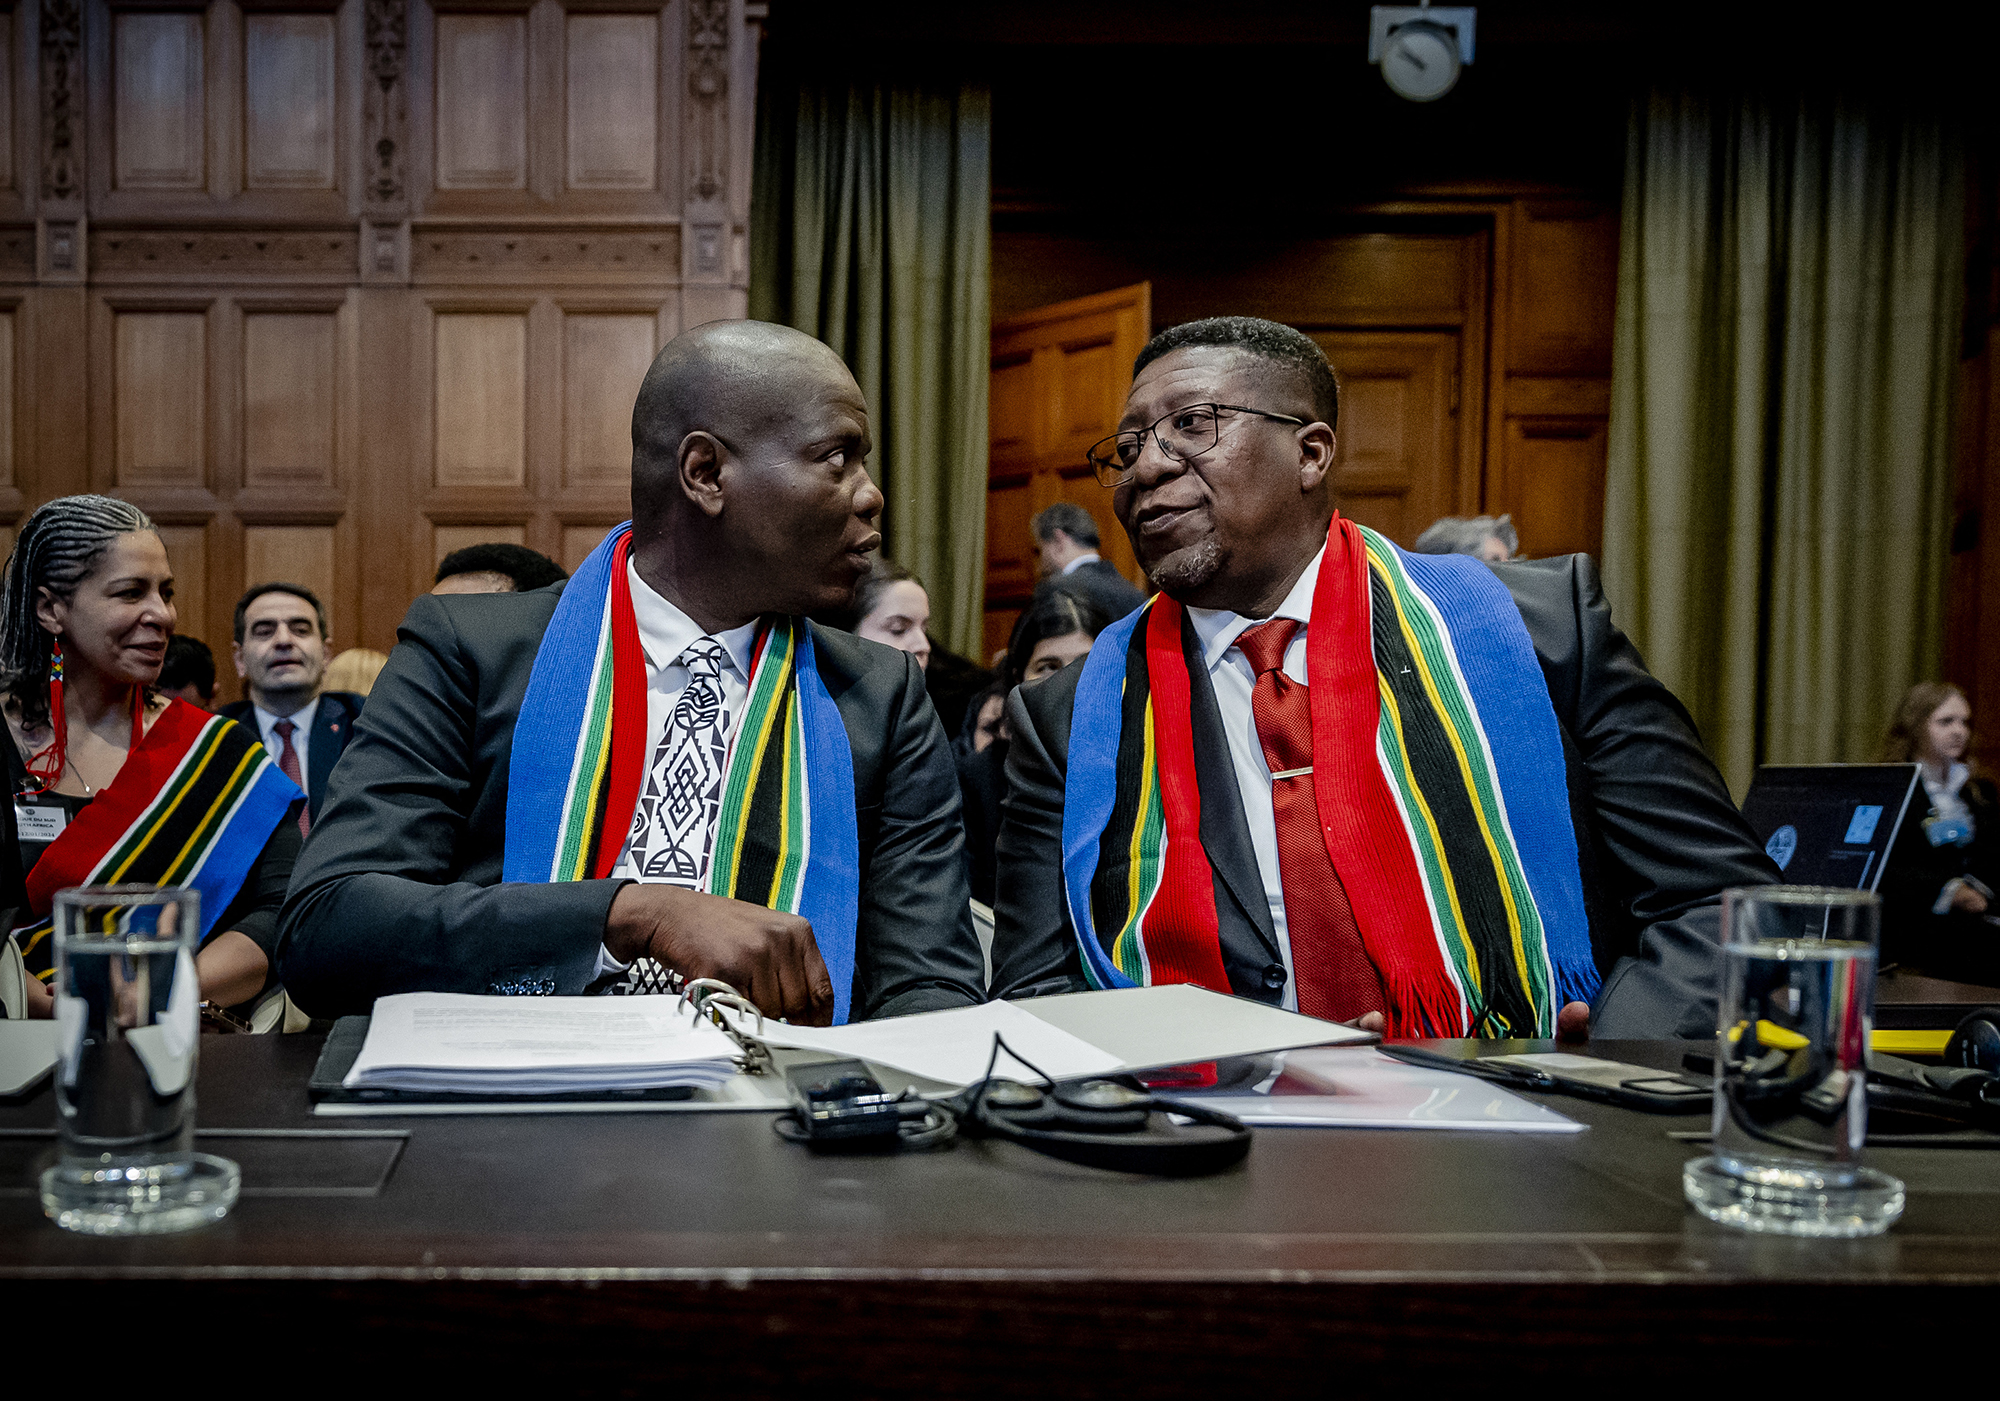 South African Justice Minister Ronald Lamola (left) and South African Ambassador to the Netherlands Vusimuzi Madonsela attend an International Court of Justice hearing before the hearing in the genocide case against Israel brought by South Africa, in The Hague, Netherlands, in January.  11.